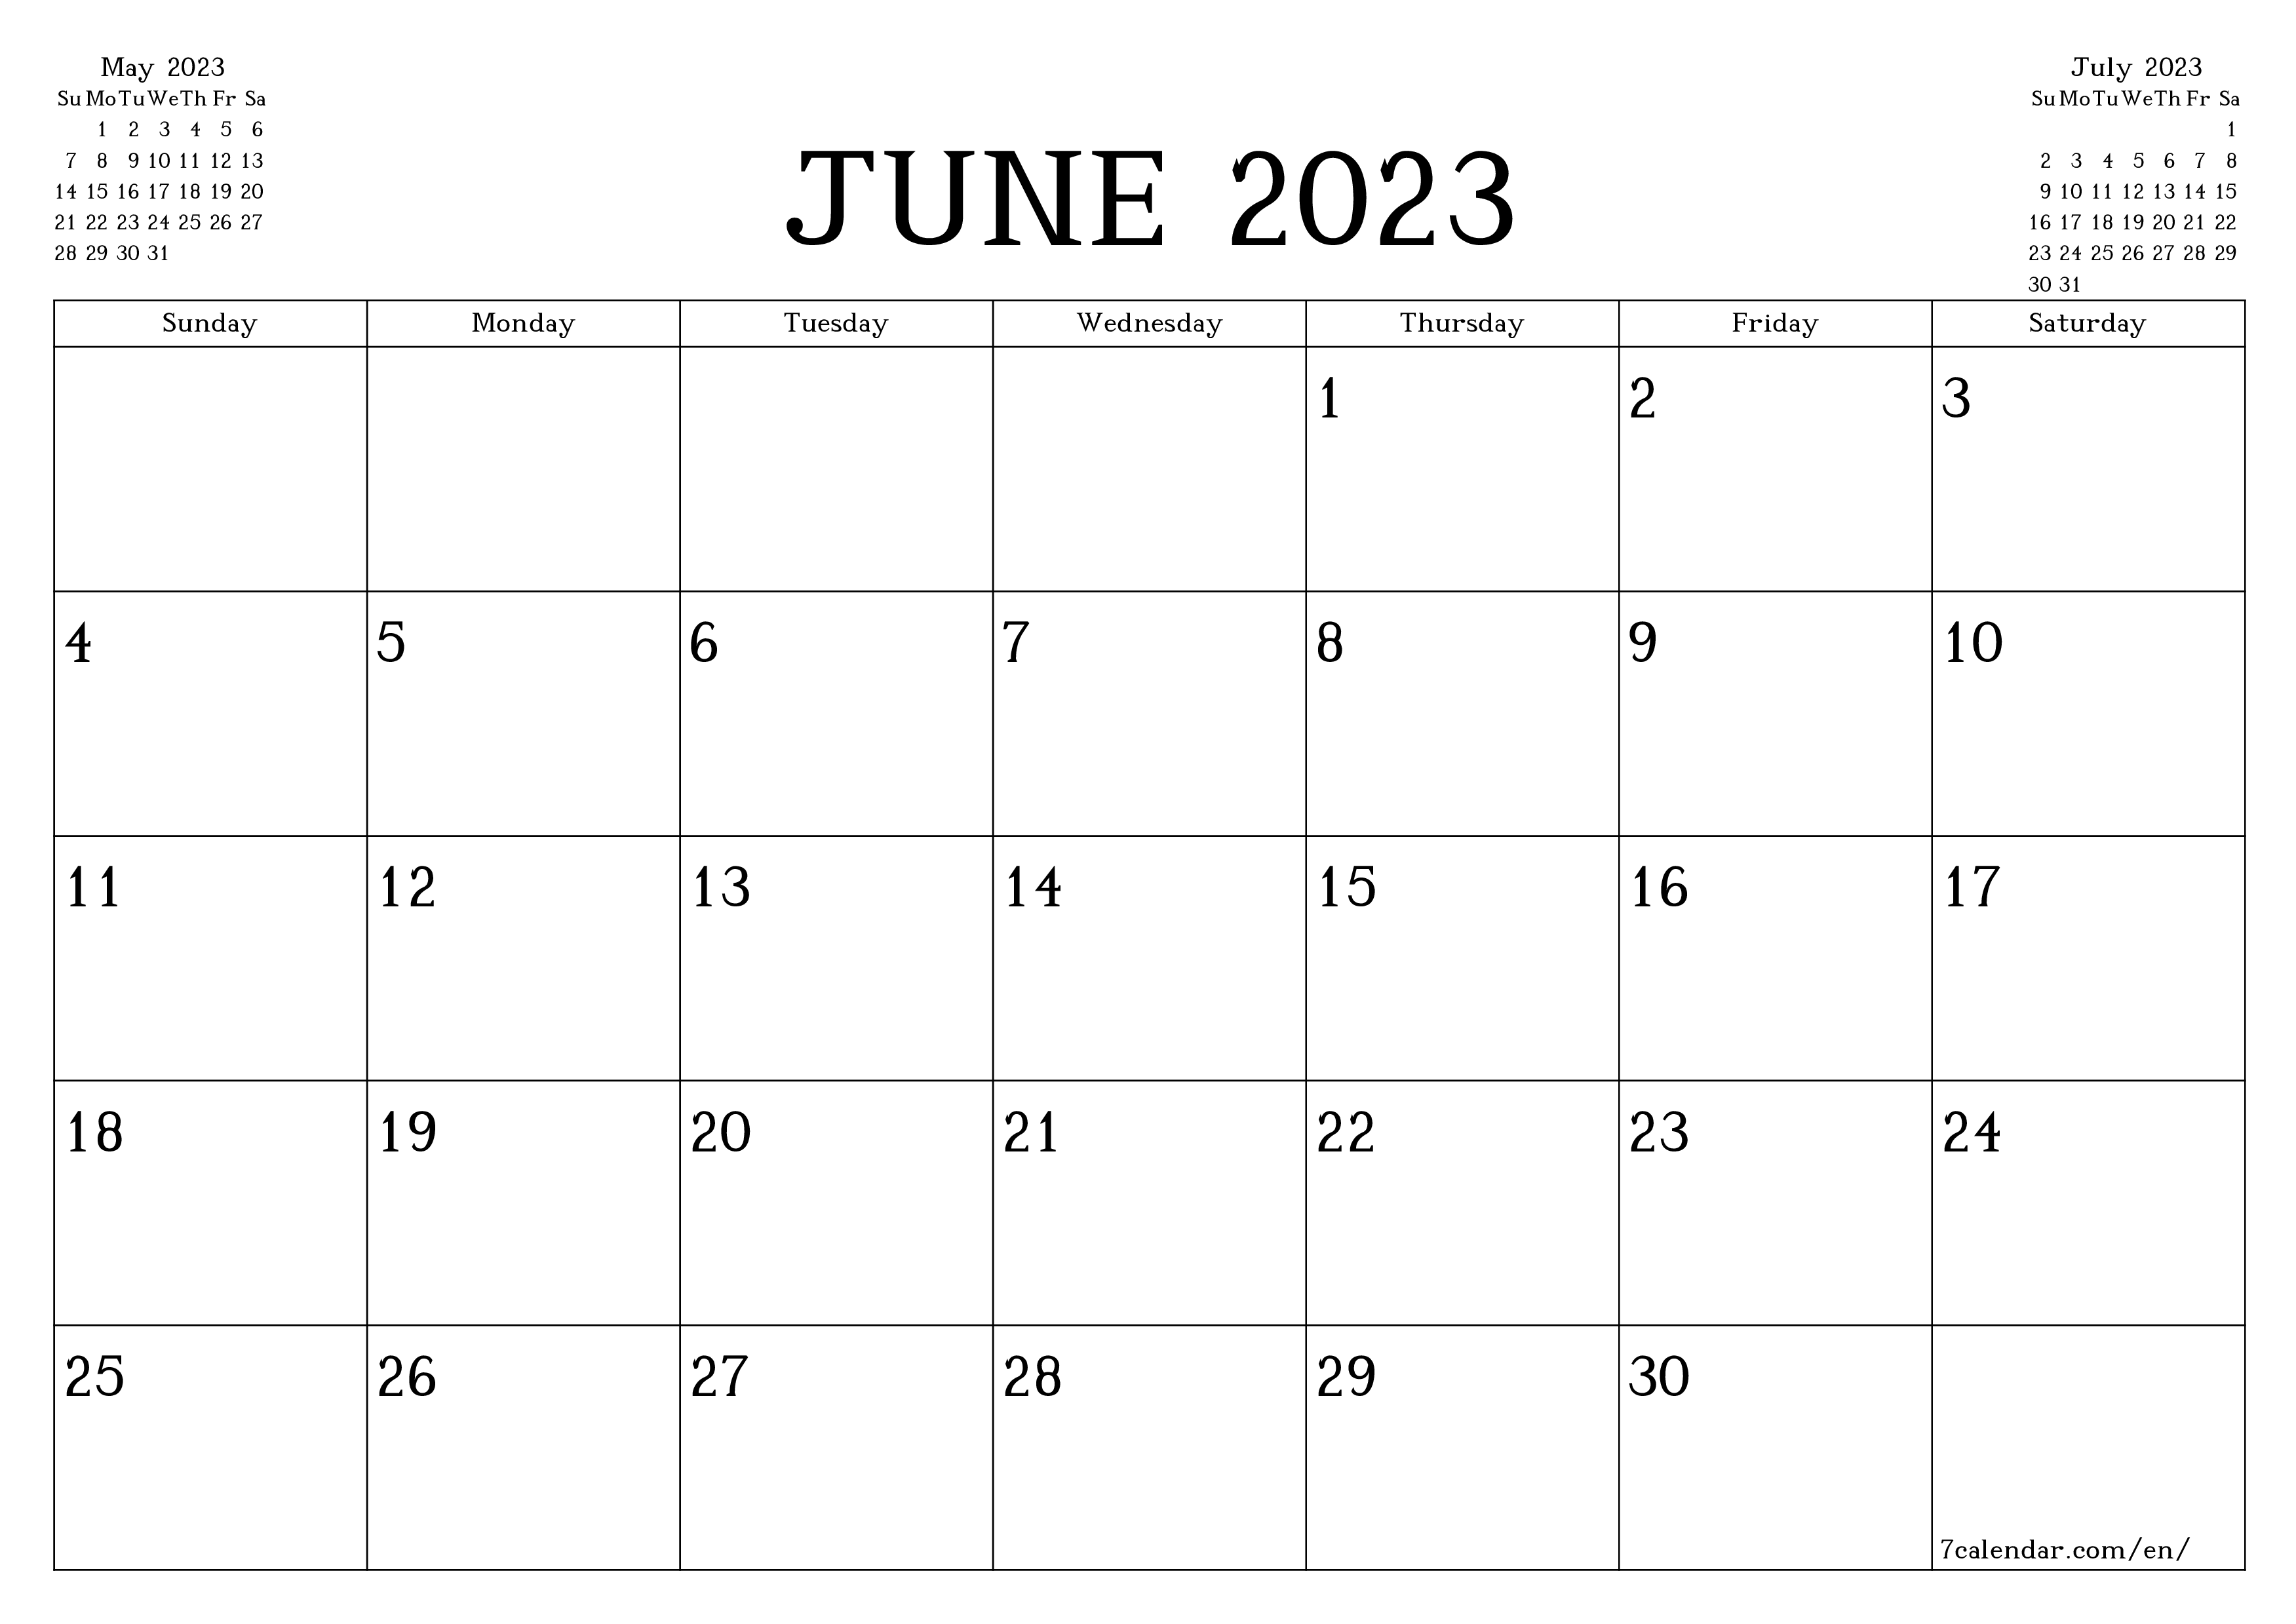 Blank monthly printable calendar and planner for month June 2023 with notes save and print to PDF PNG English - 7calendar.com